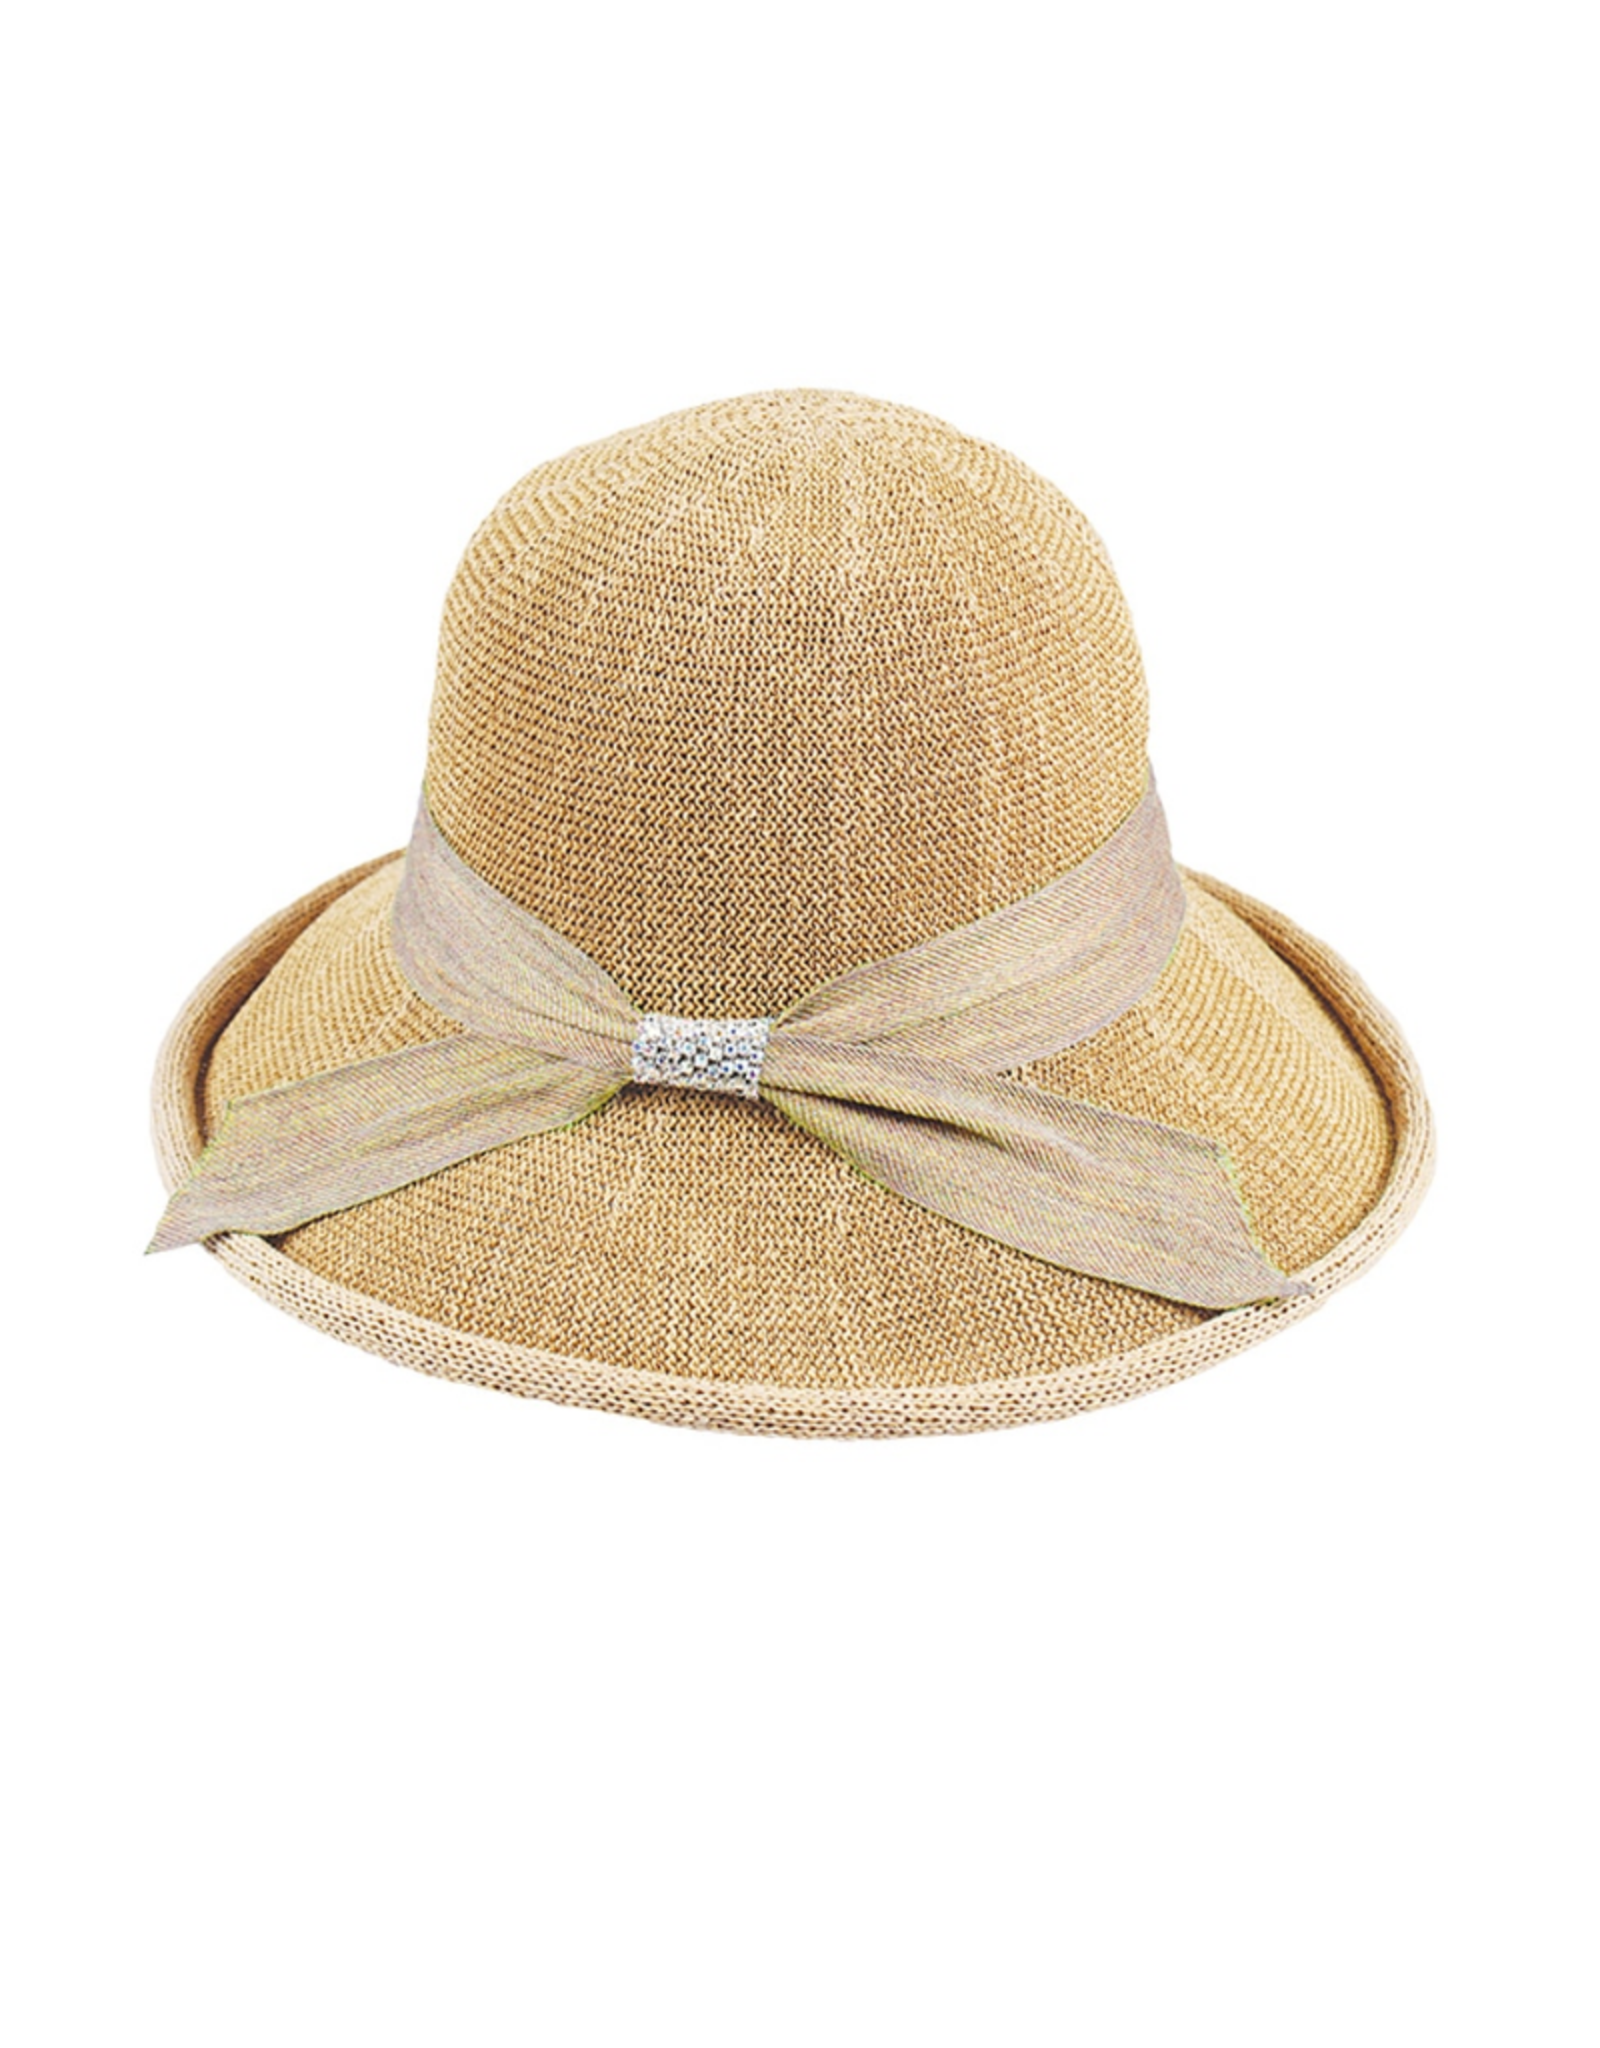 HAT-CLOCHE-ROLLED BRIM, WIDE BAND W/ BOW